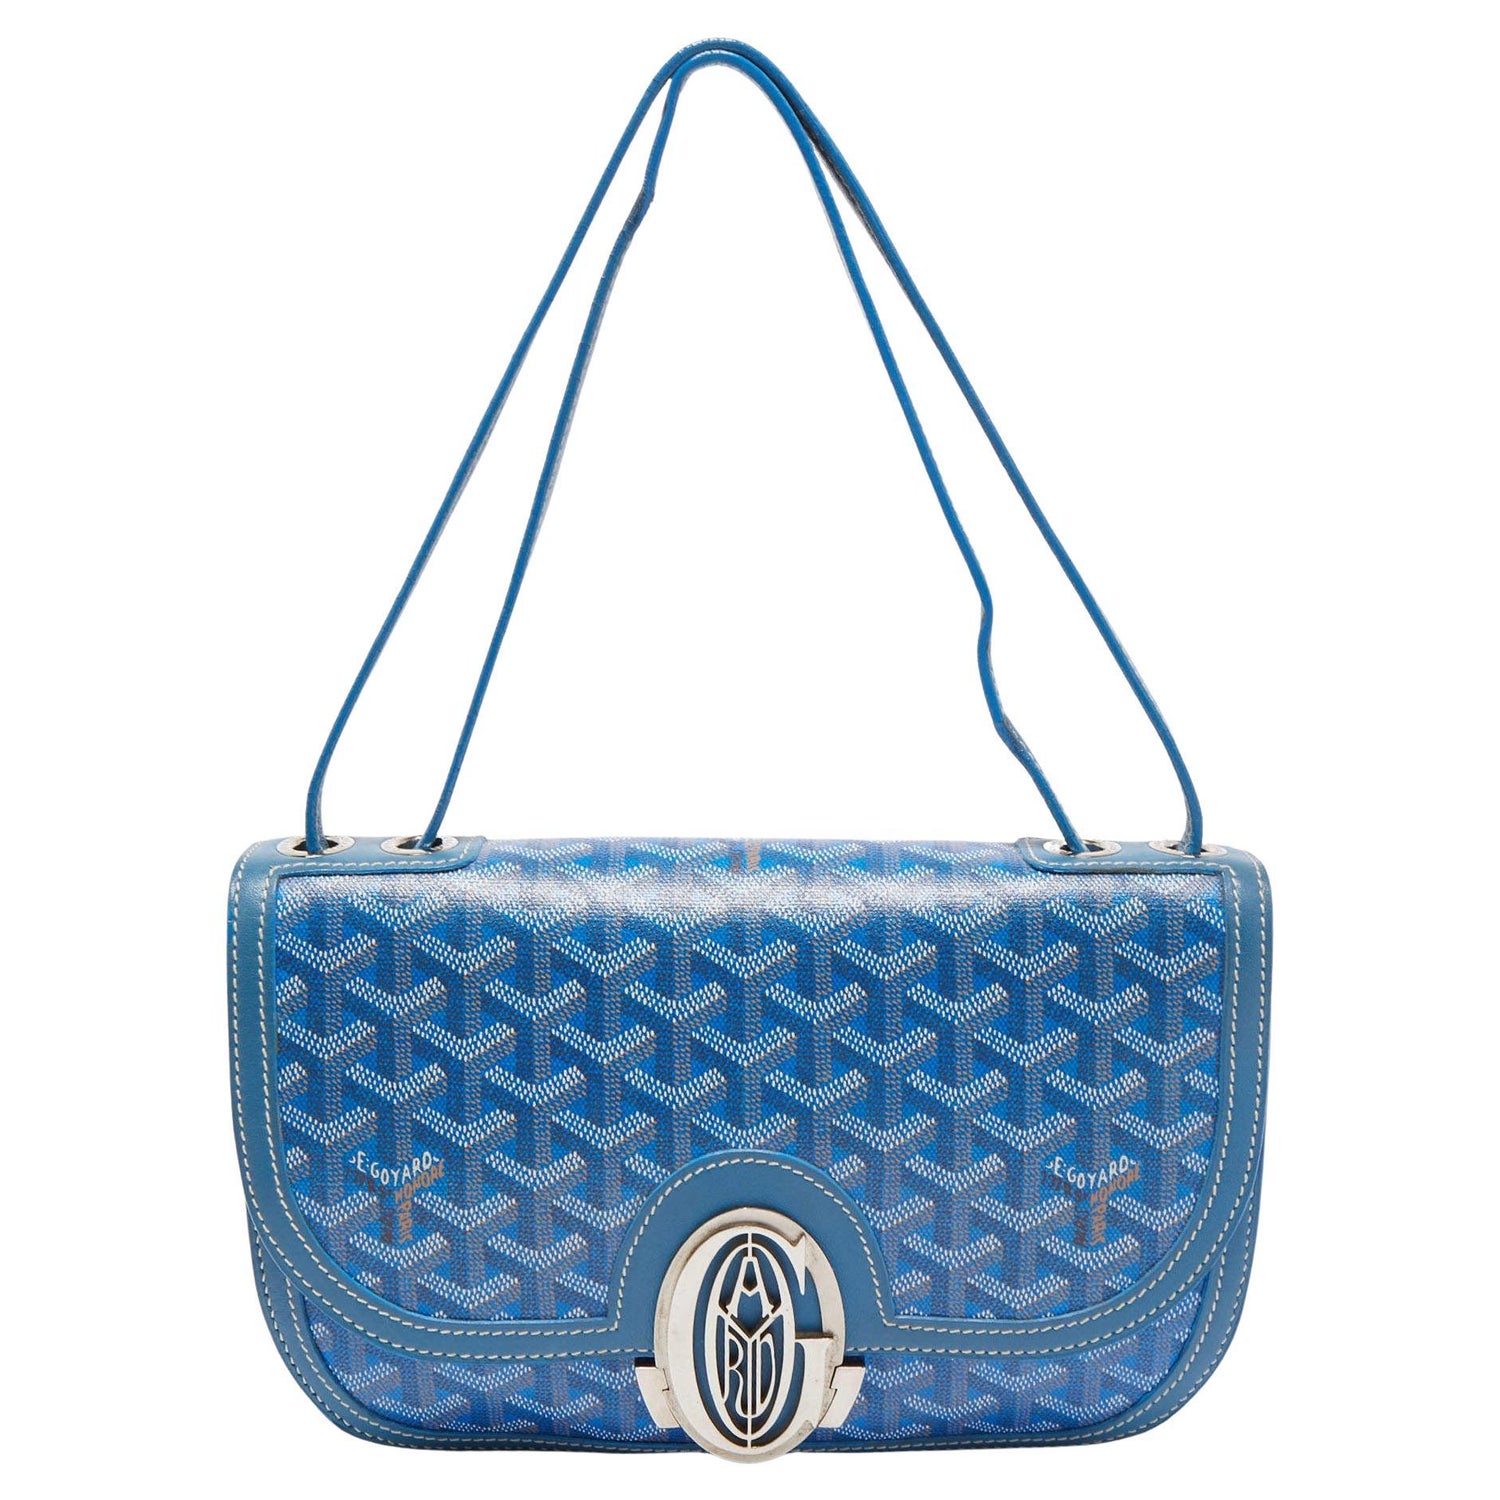 Blue Goyard Bag - 5 For Sale on 1stDibs  gotard tote price, how much is a  gotard tote, rouette structure pm bag price